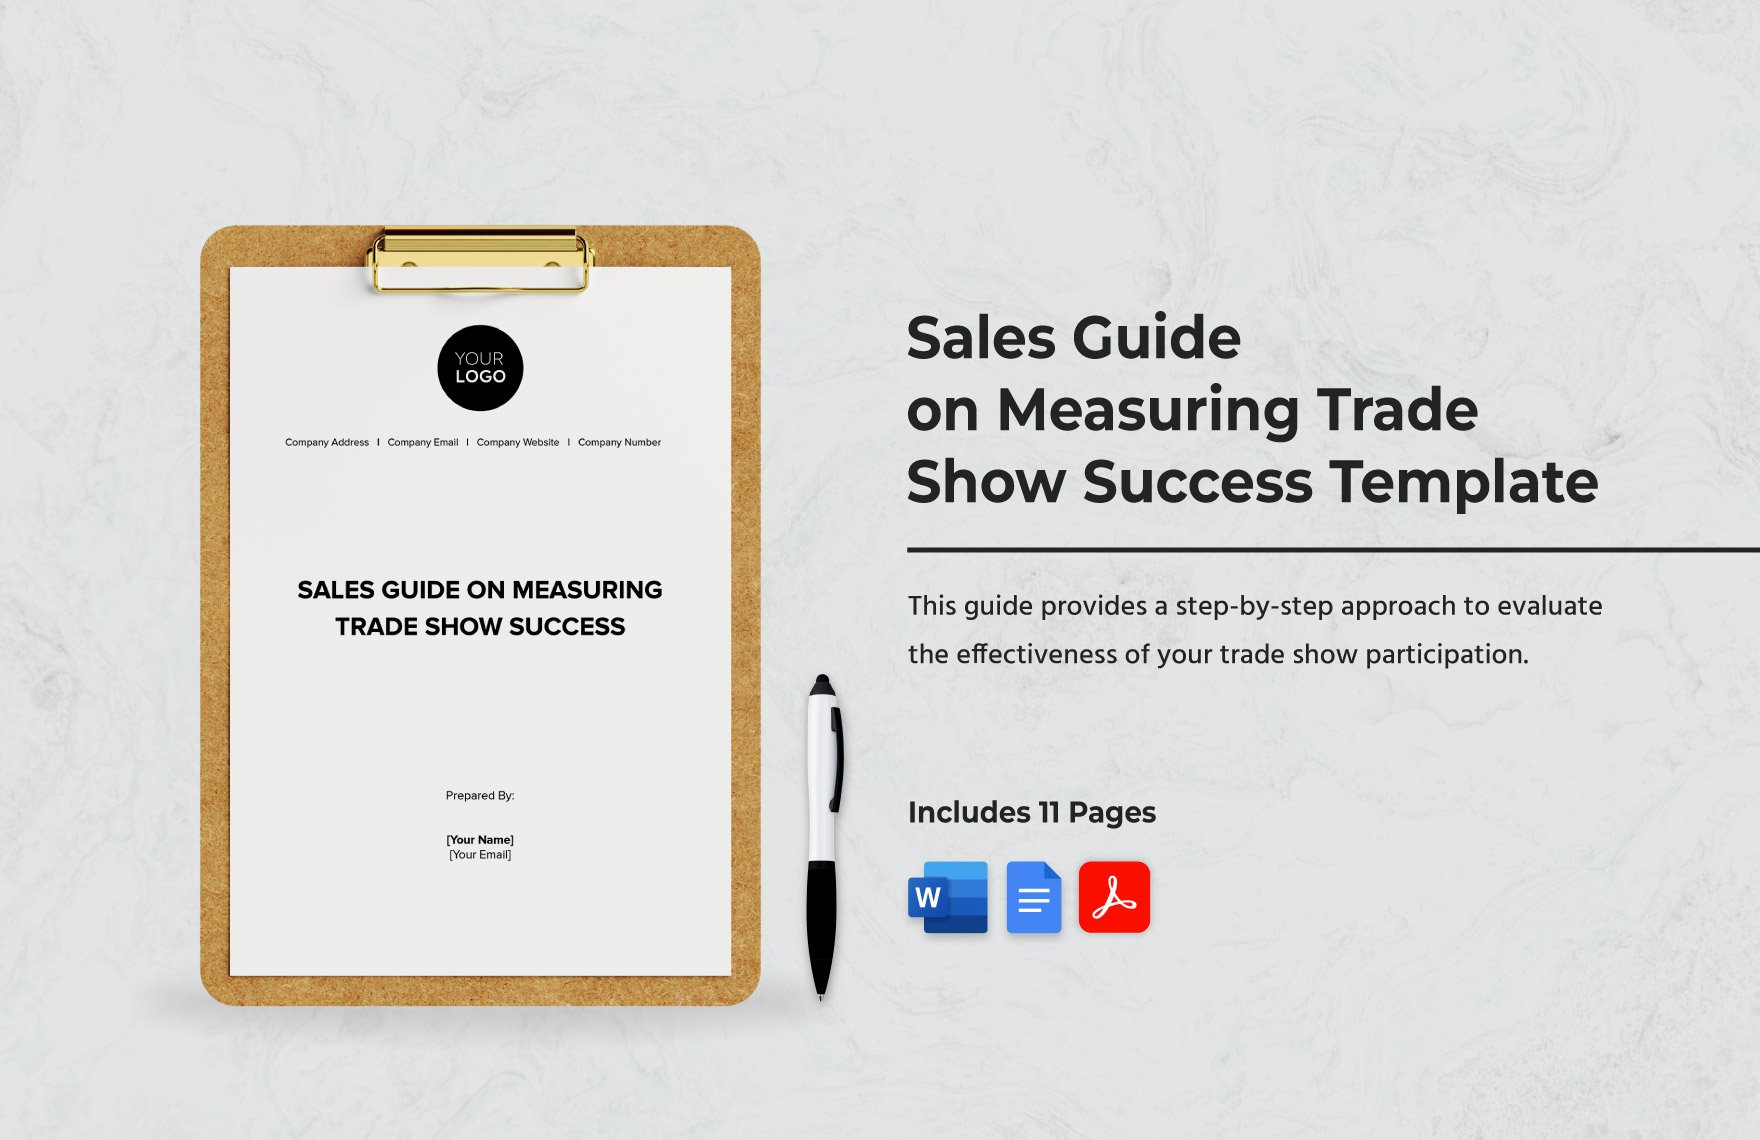 Sales Guide on Measuring Trade Show Success Template